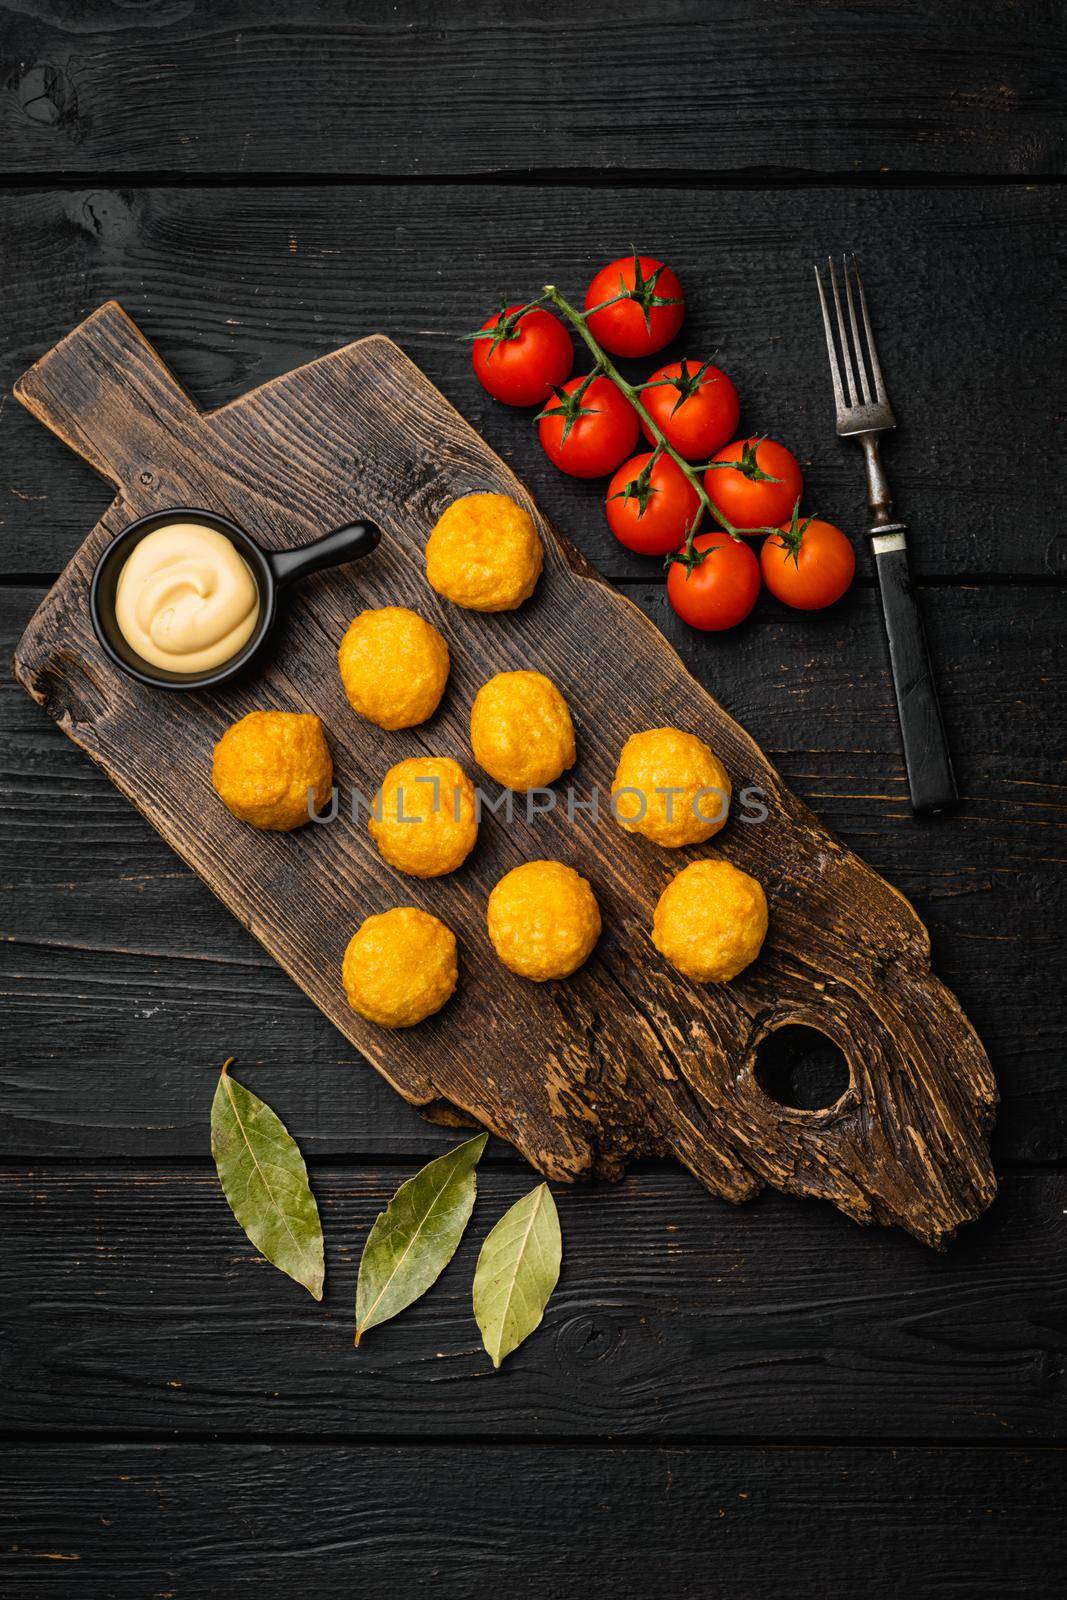 Battered meat on black wooden table background, top view flat lay by Ilianesolenyi